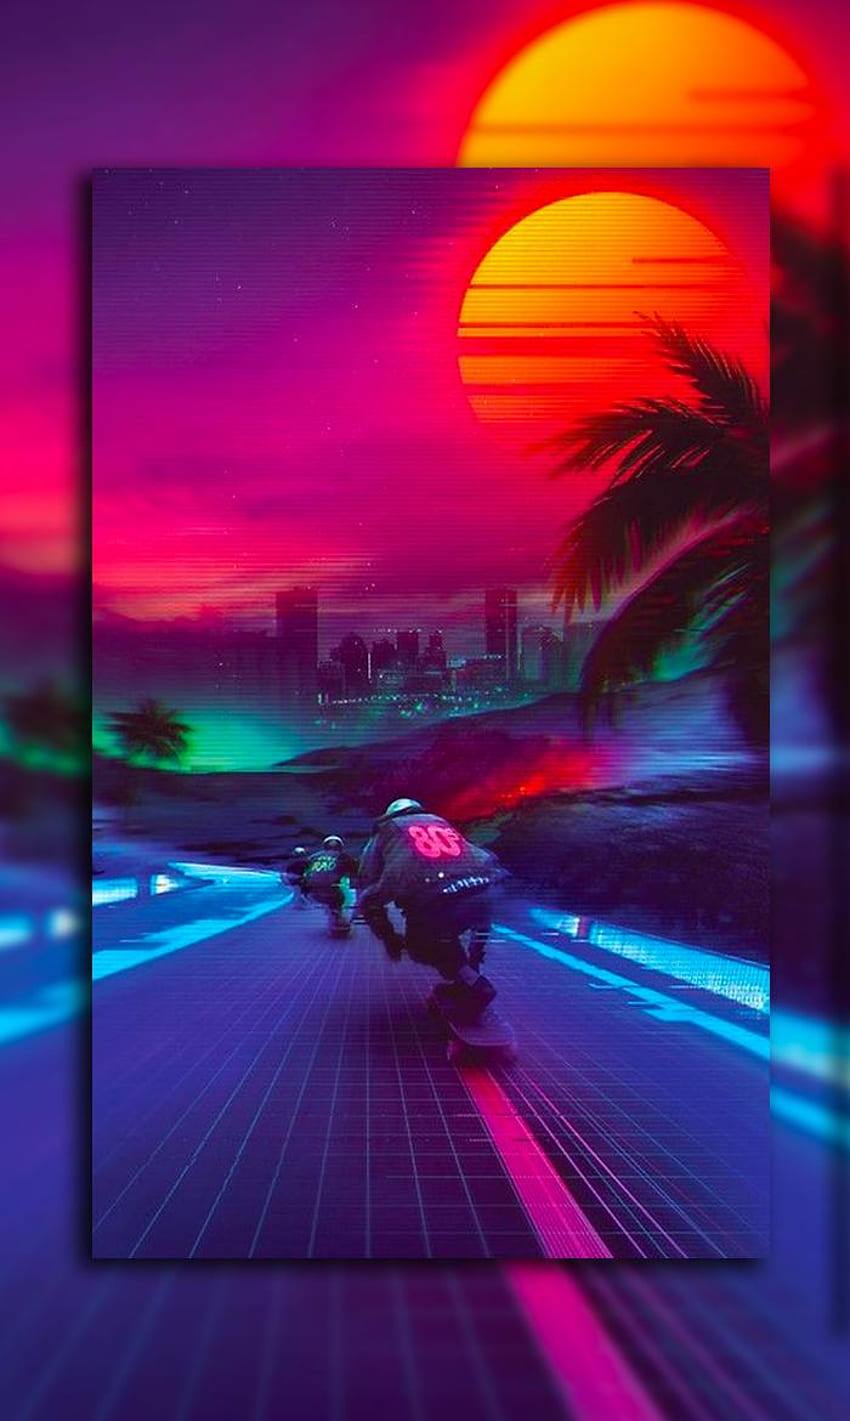 Has been my wallpaper for some time now love the 80s vibe it has   rphonewallpapers